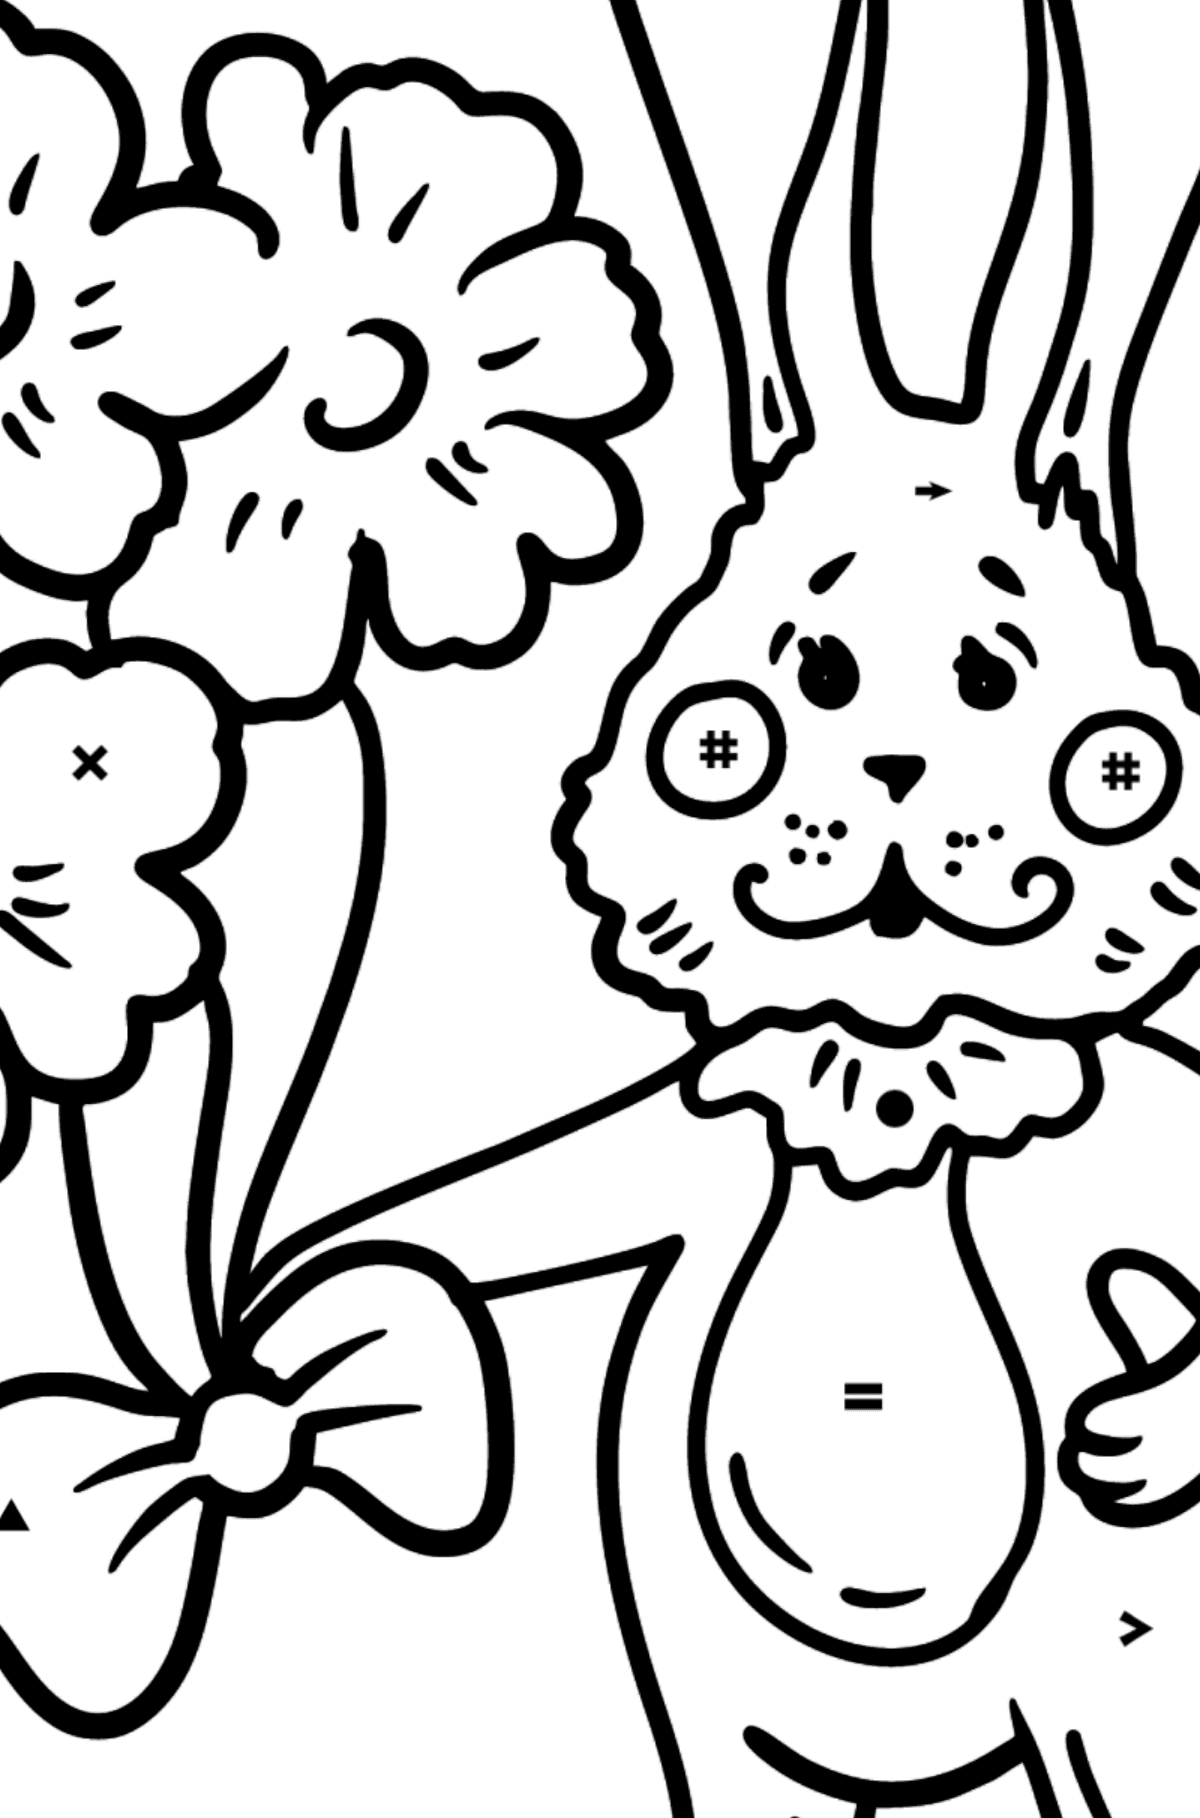 Bunny with a Bouquet of Flowers coloring page - Coloring by Symbols for Kids